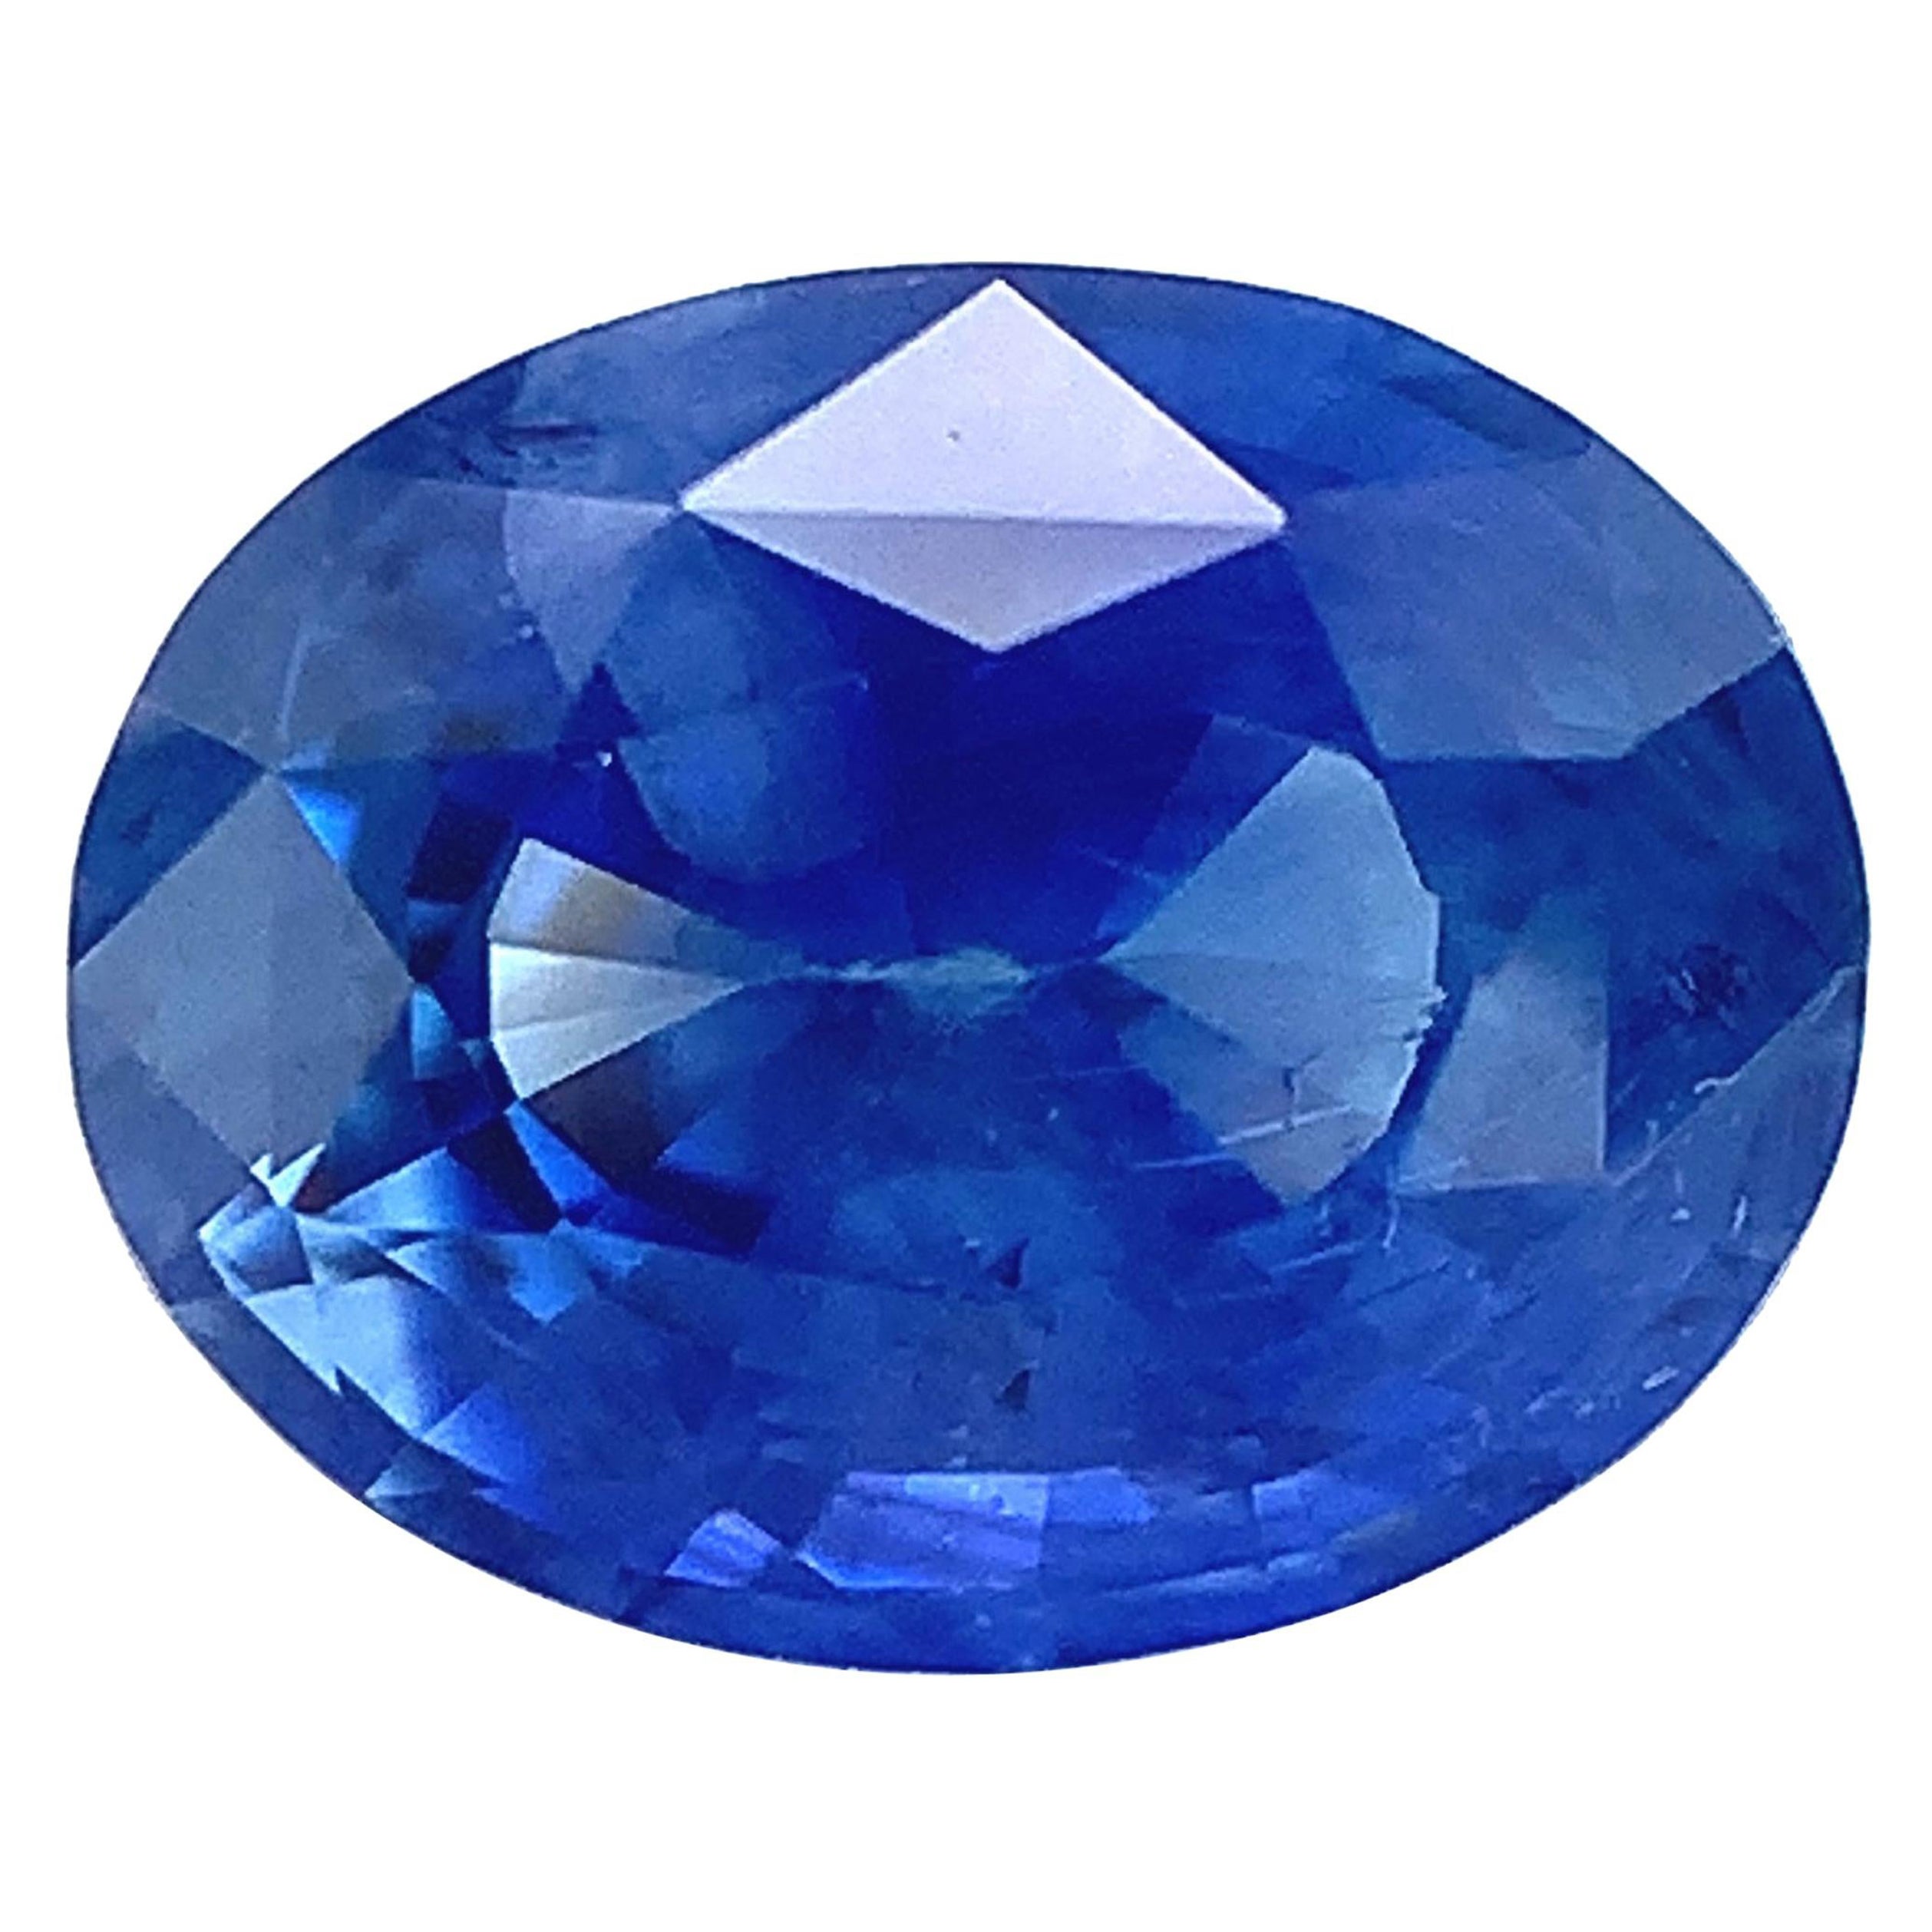 2.19 Carat Cornflower Blue Sapphire Oval, Unset Loose Gemstone, GIA Certified For Sale